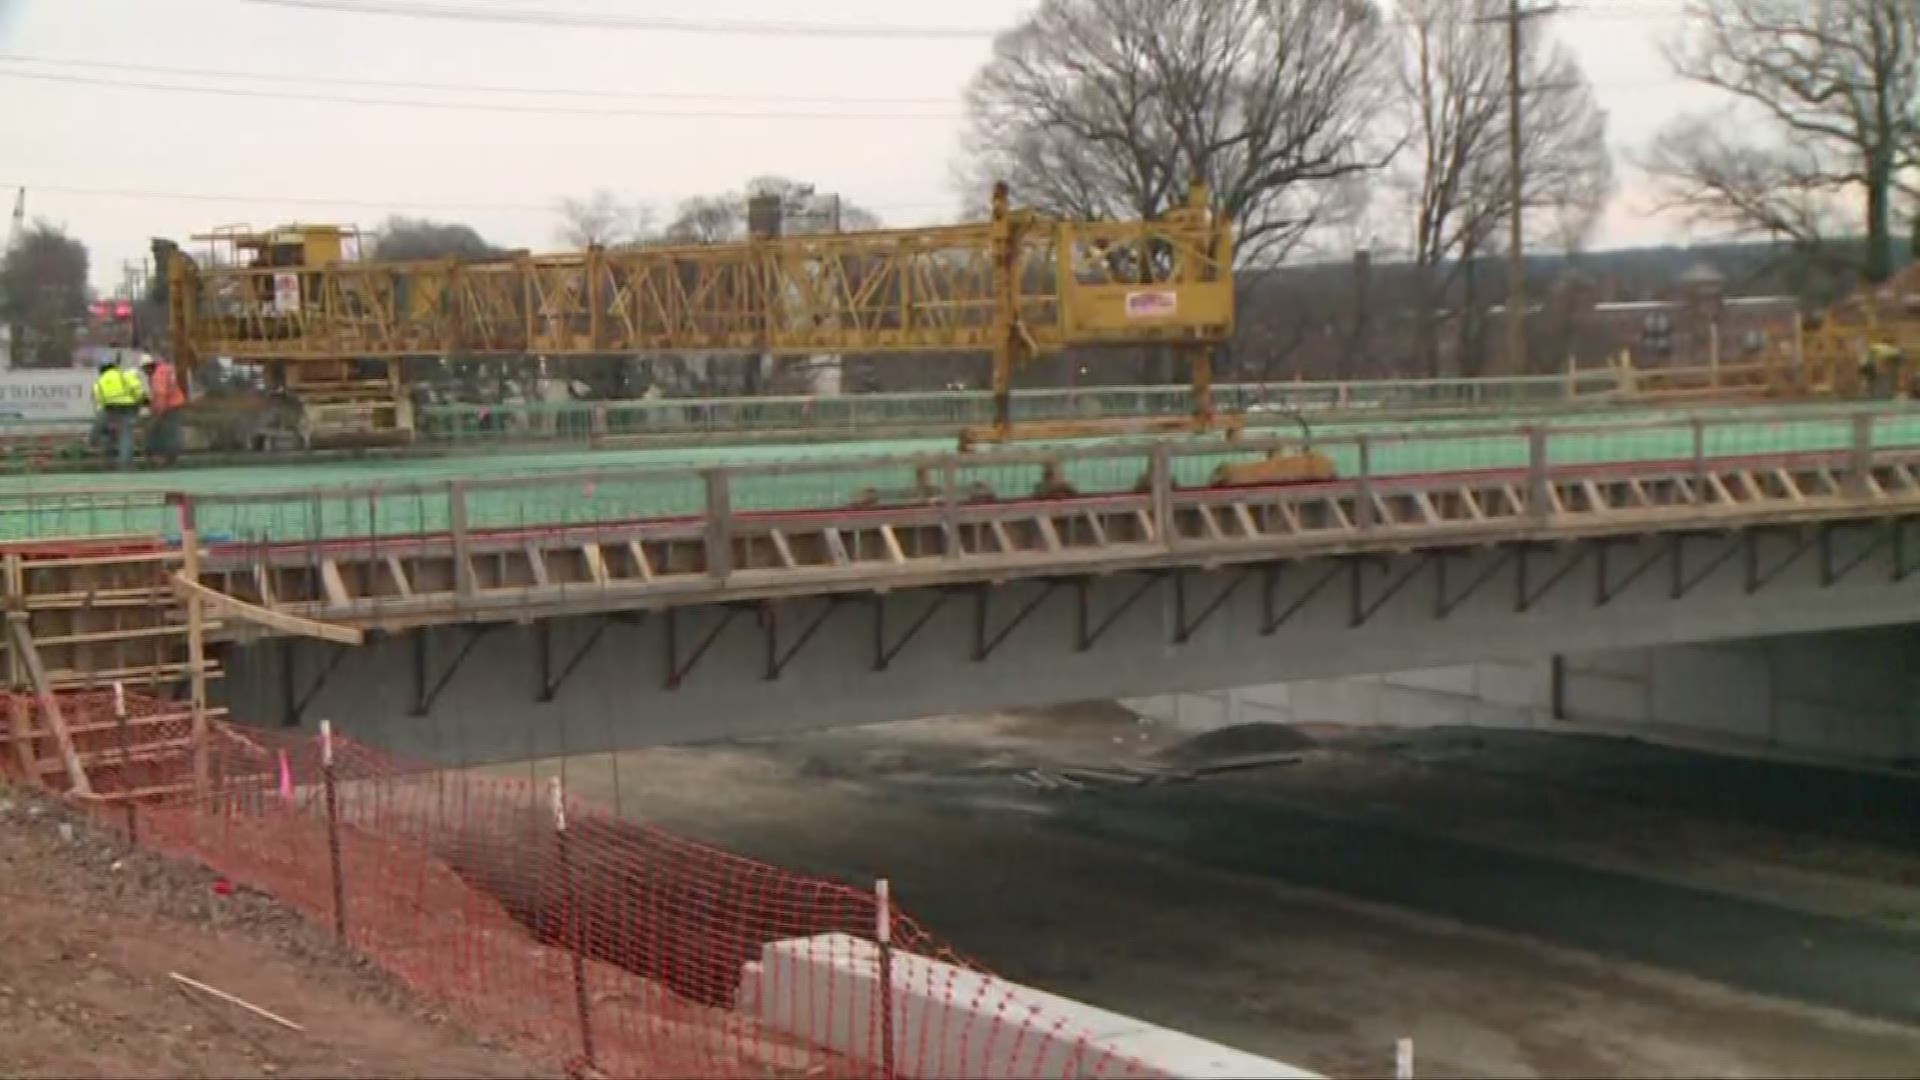 NCDOT says the parts of the project are slightly ahead of schedule, but that doesn't mean the entire Business 40 project will end any earlier.